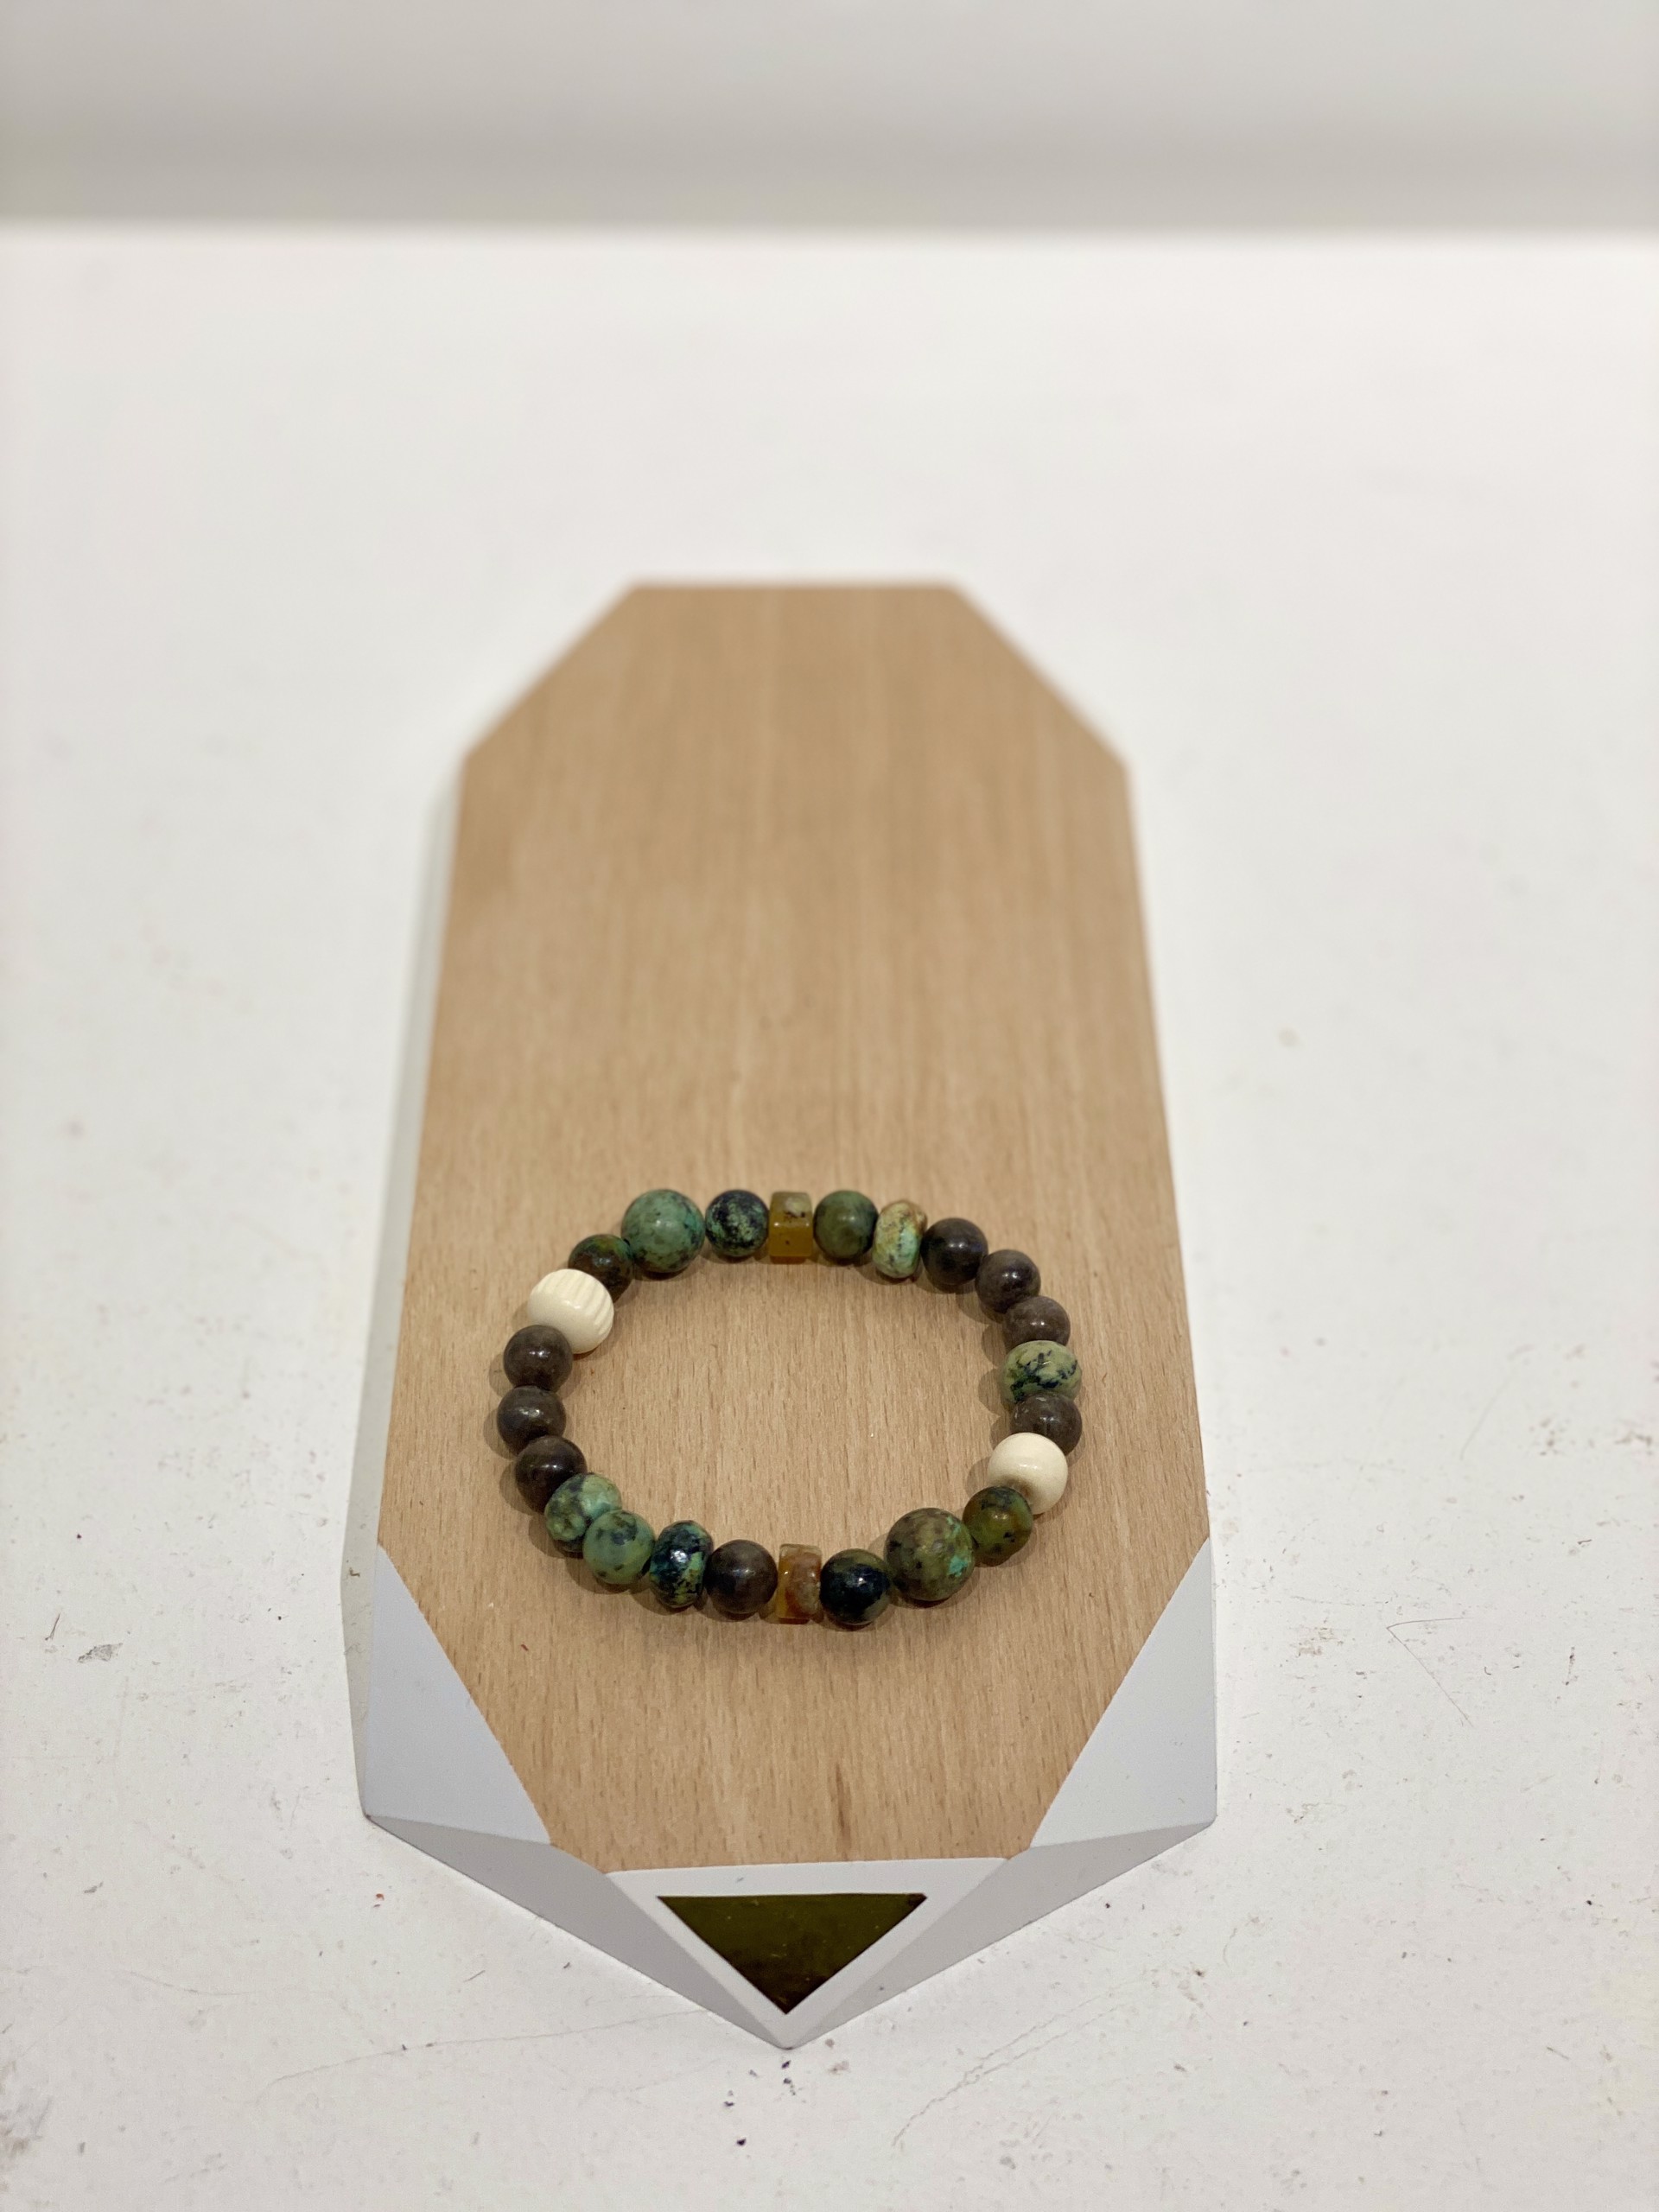 African Turquoise bracelet #29 by Melissa Turney